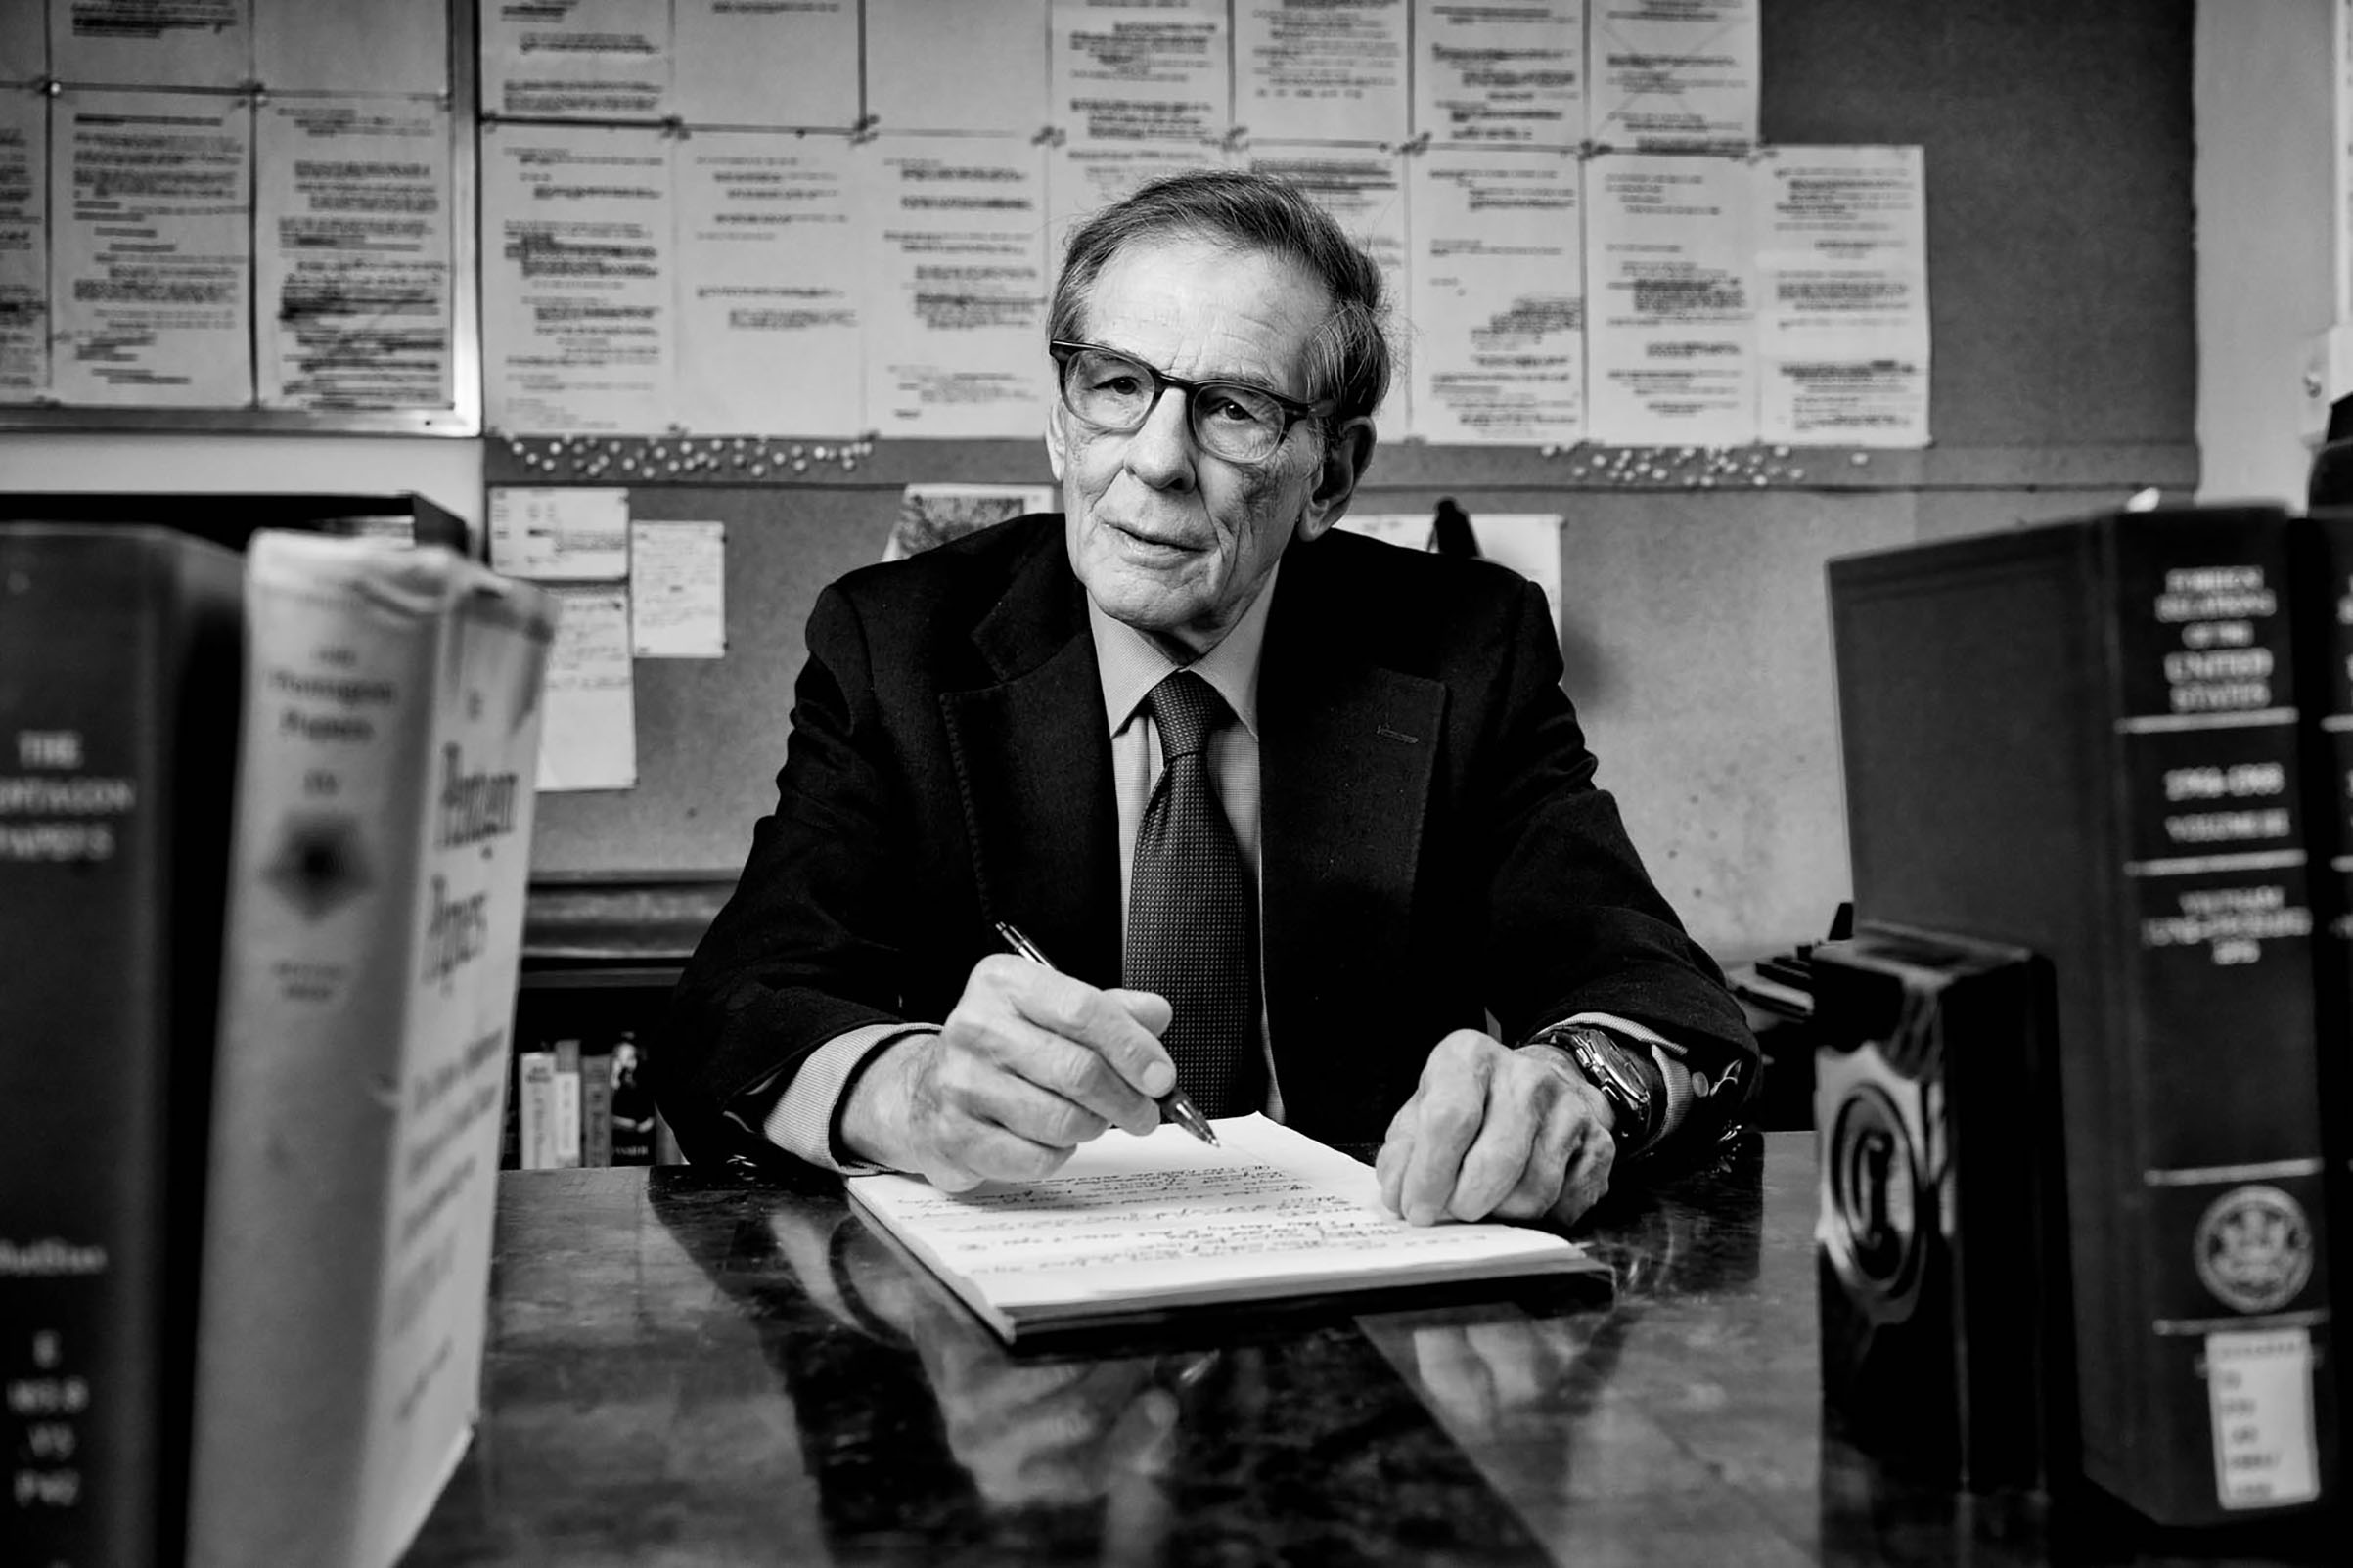 ‘I was always too fast, and wanted to make myself think things all the way through.’ —Robert Caro, on his work habits (Phil Penman)